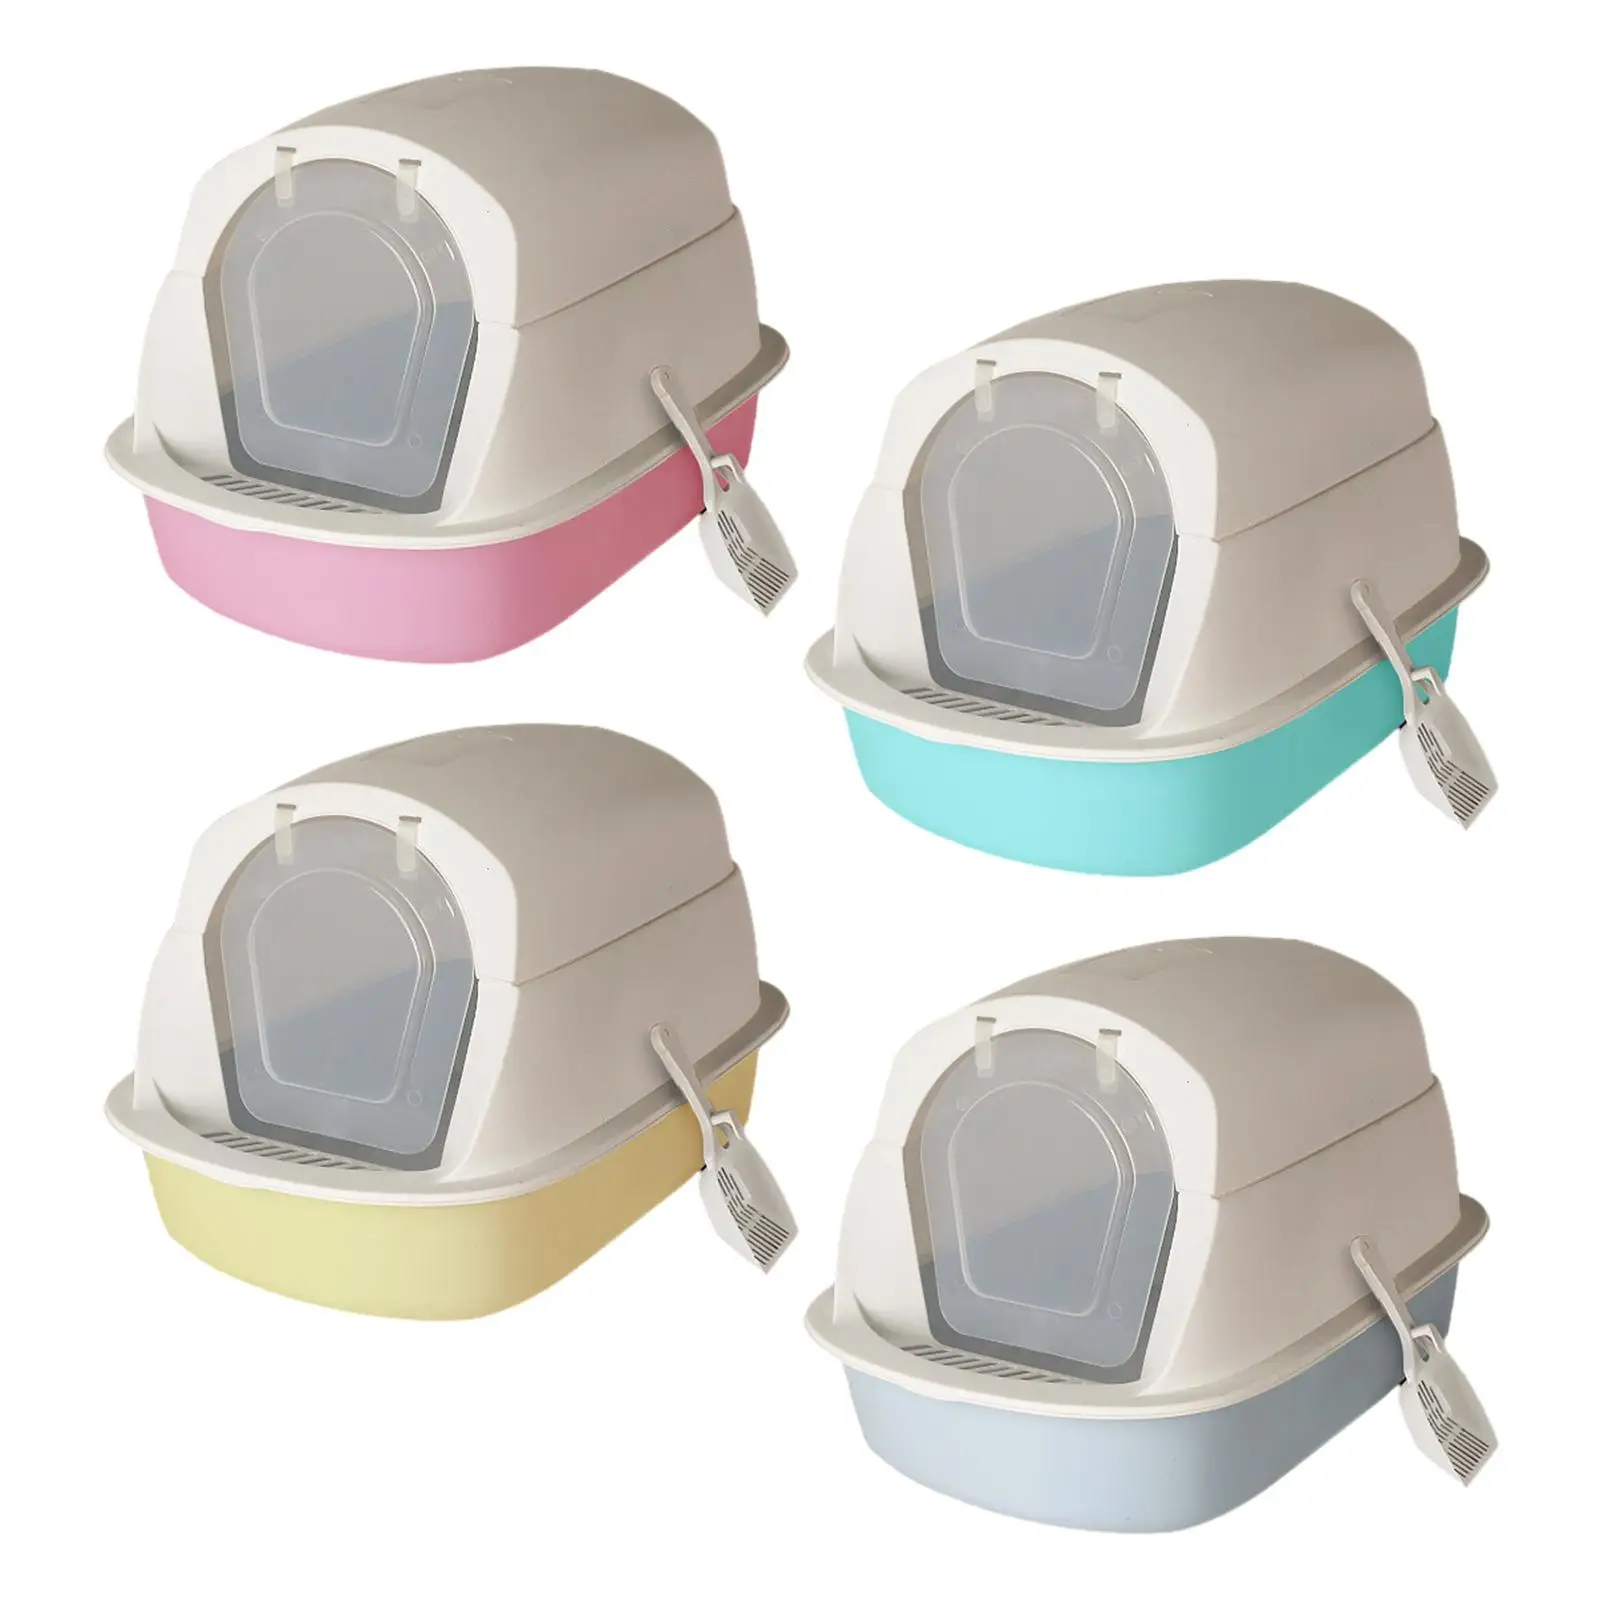 With Lid Fully Enclosed Cat Toilet With Door Enclosed Cat Litter Box Pet Supplies Hooded Pet Litter Tray